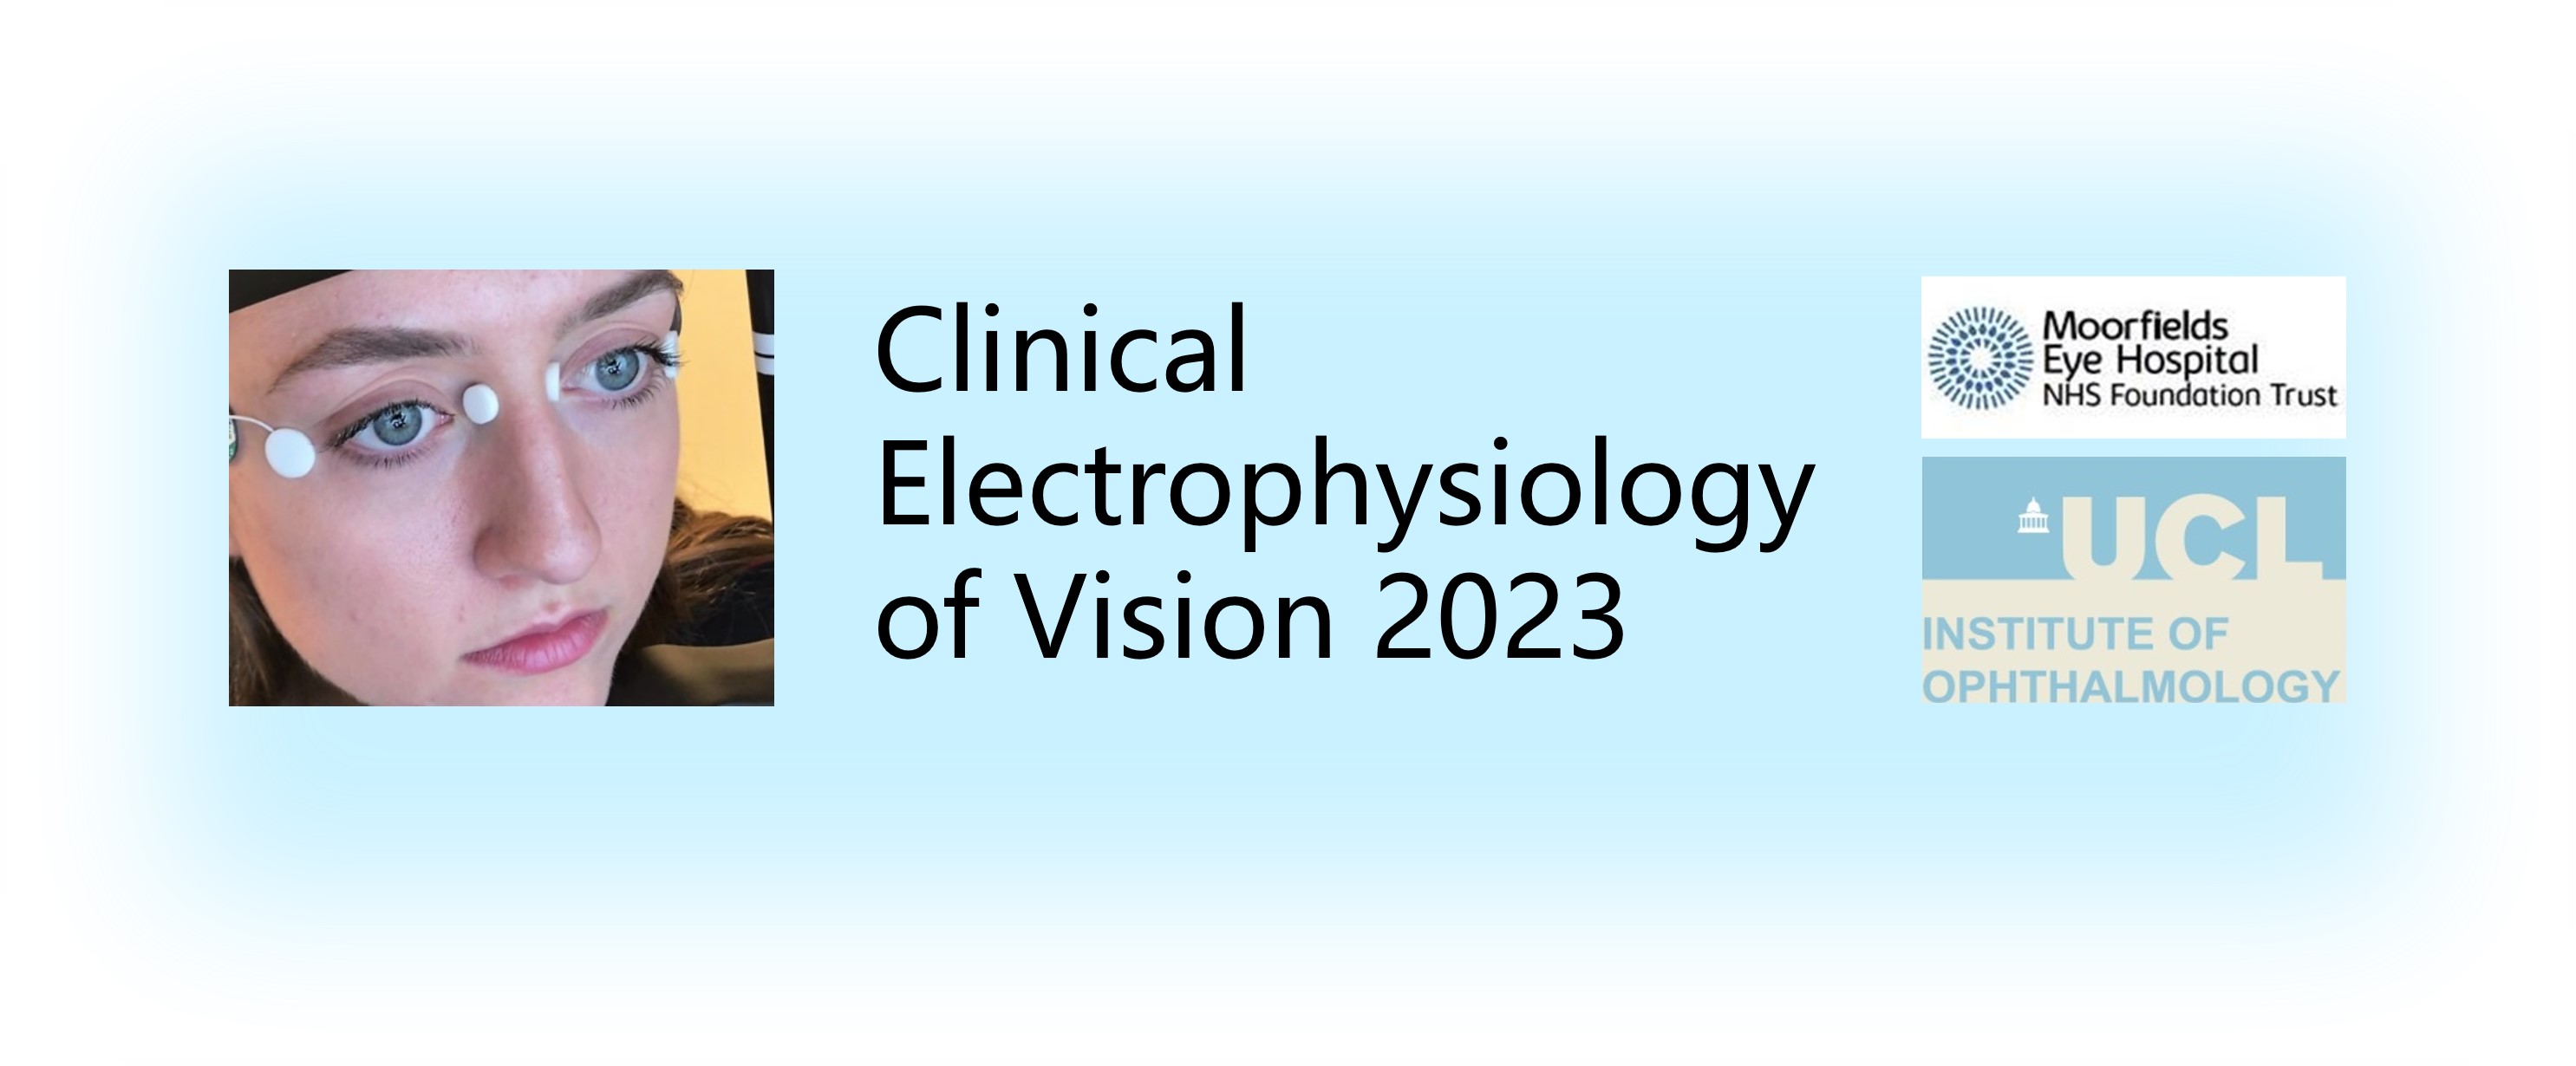 Clinical Electrophysiology of Vision